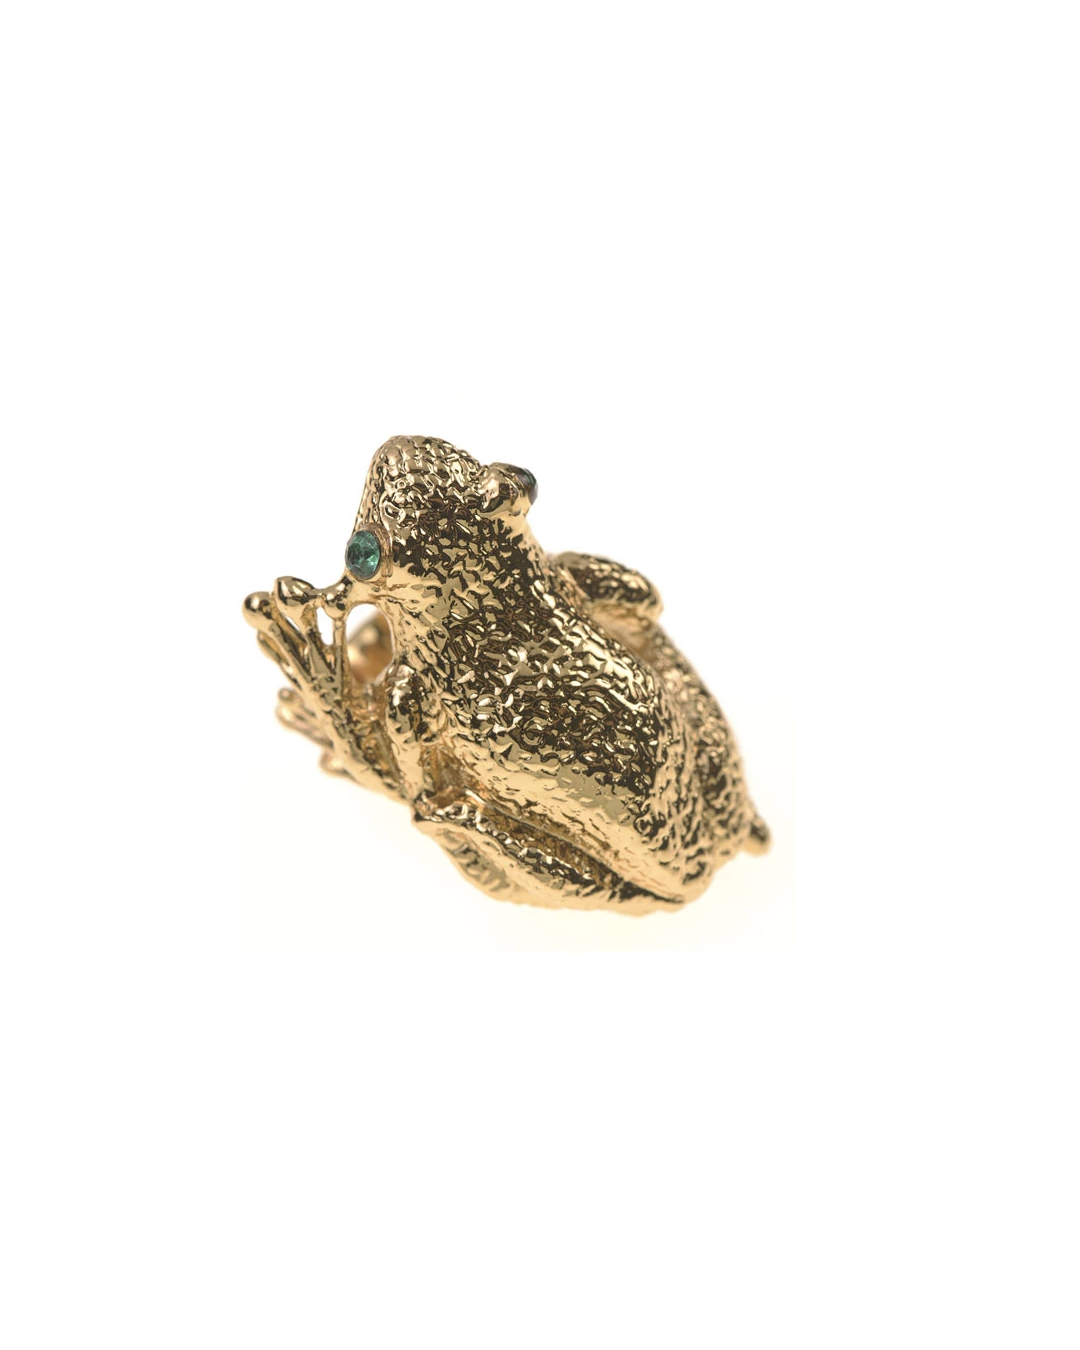 Poisonous Frog Ring